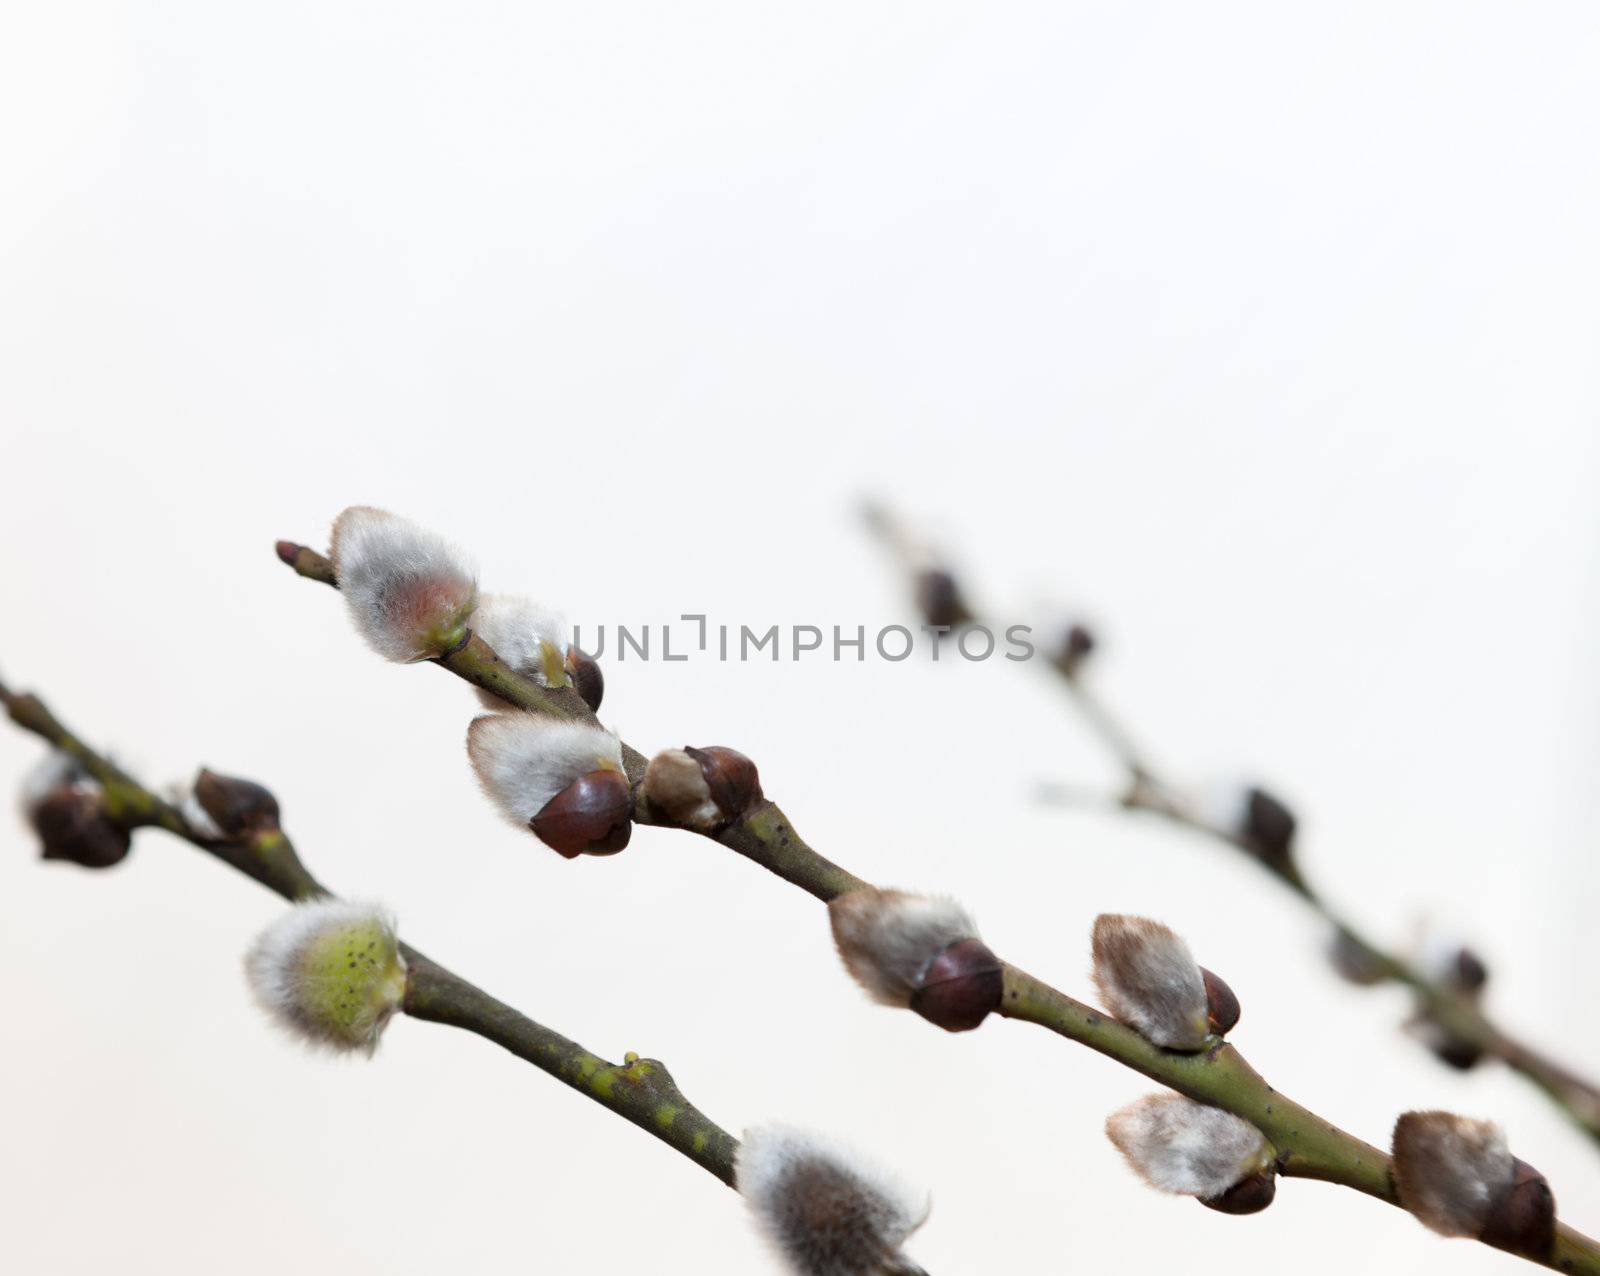 Willow branches on a white background